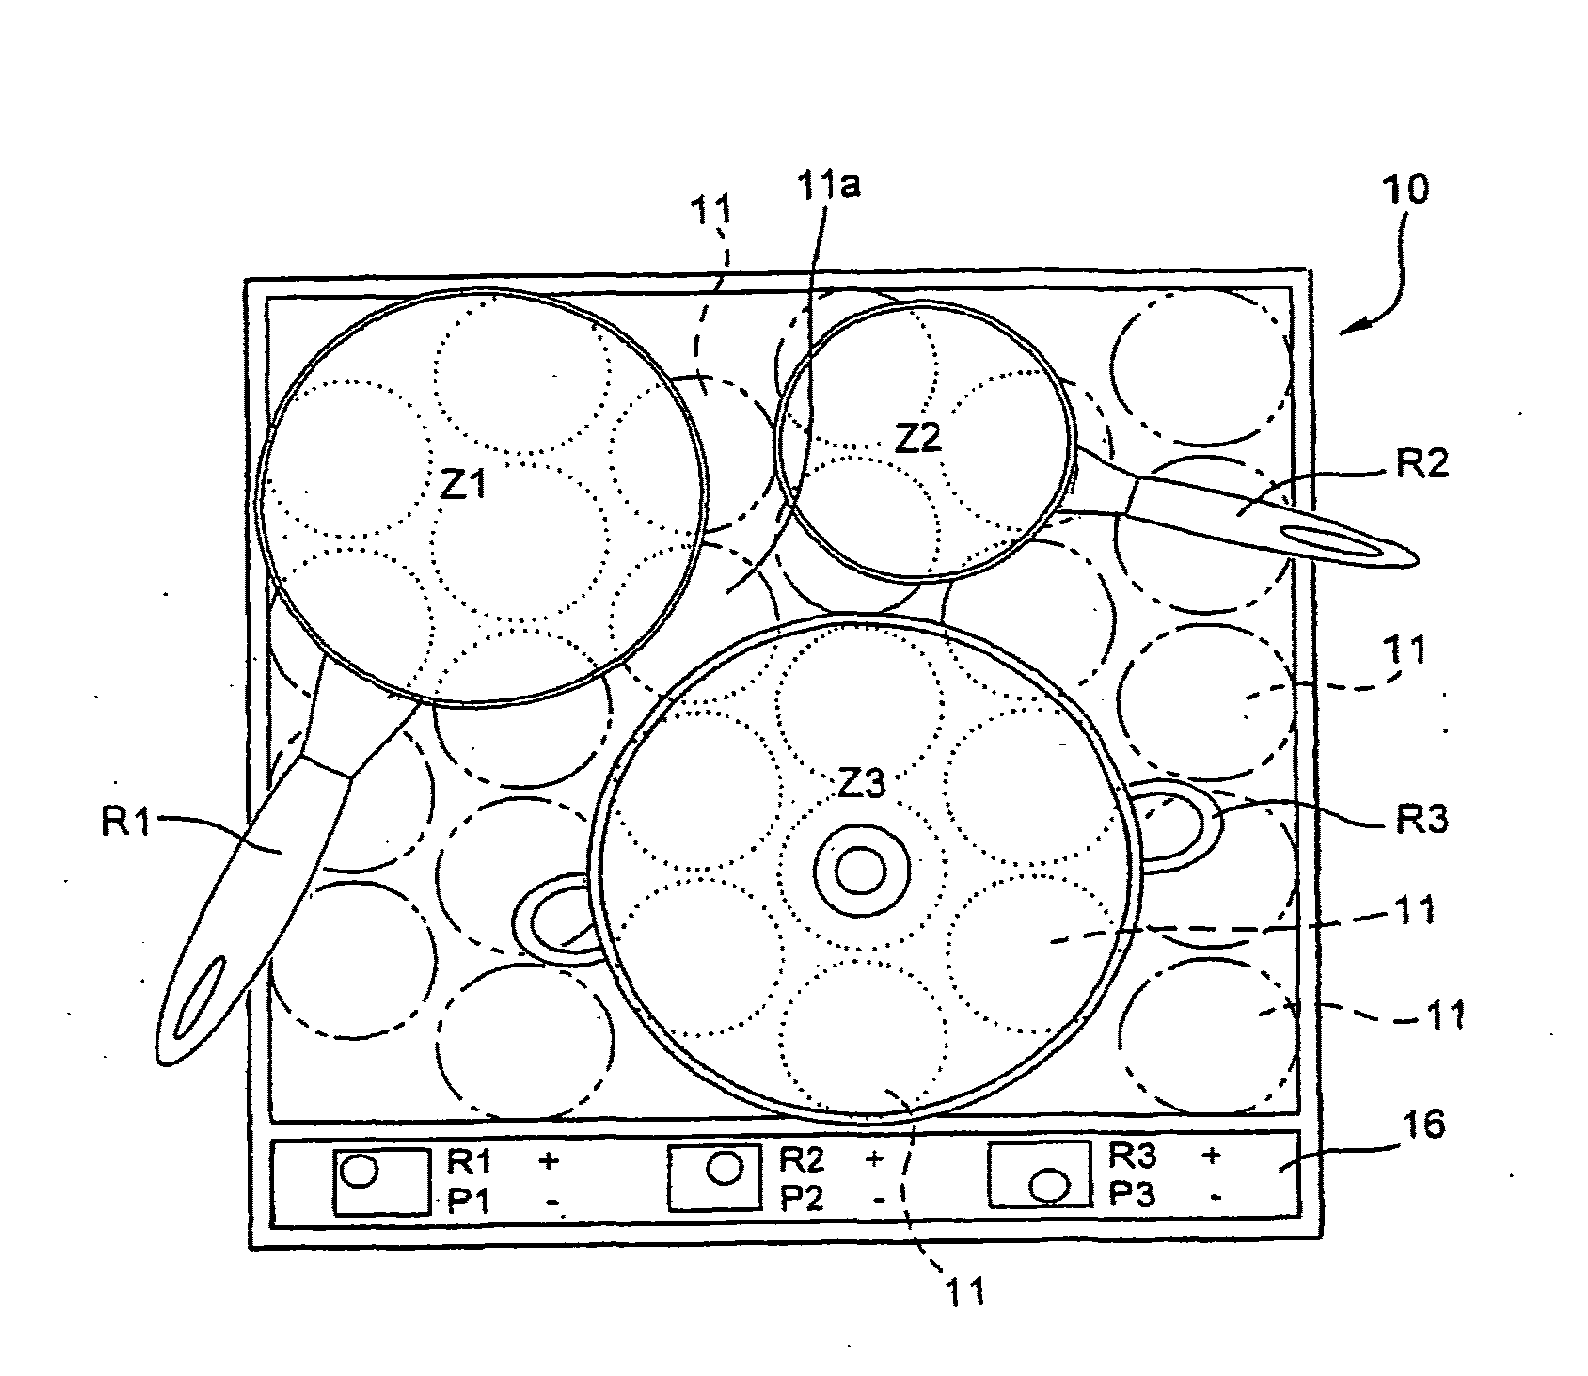 Method for heating a container placed on a cooktop by heating means associated to inductors